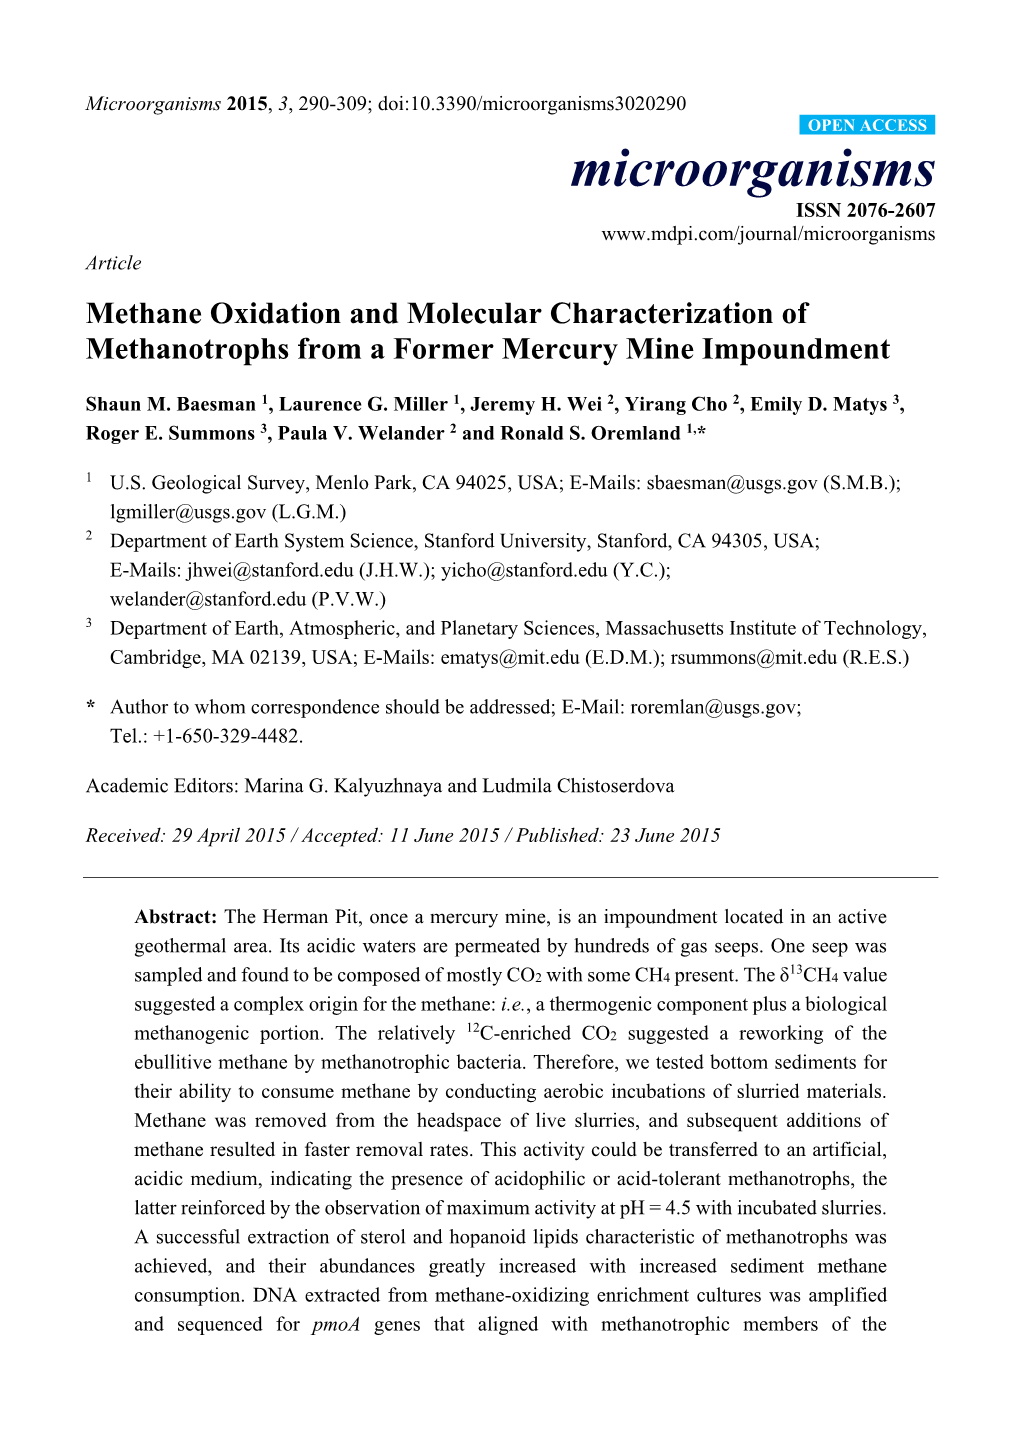 Methane Oxidation and Molecular Characterization of Methanotrophs from a Former Mercury Mine Impoundment